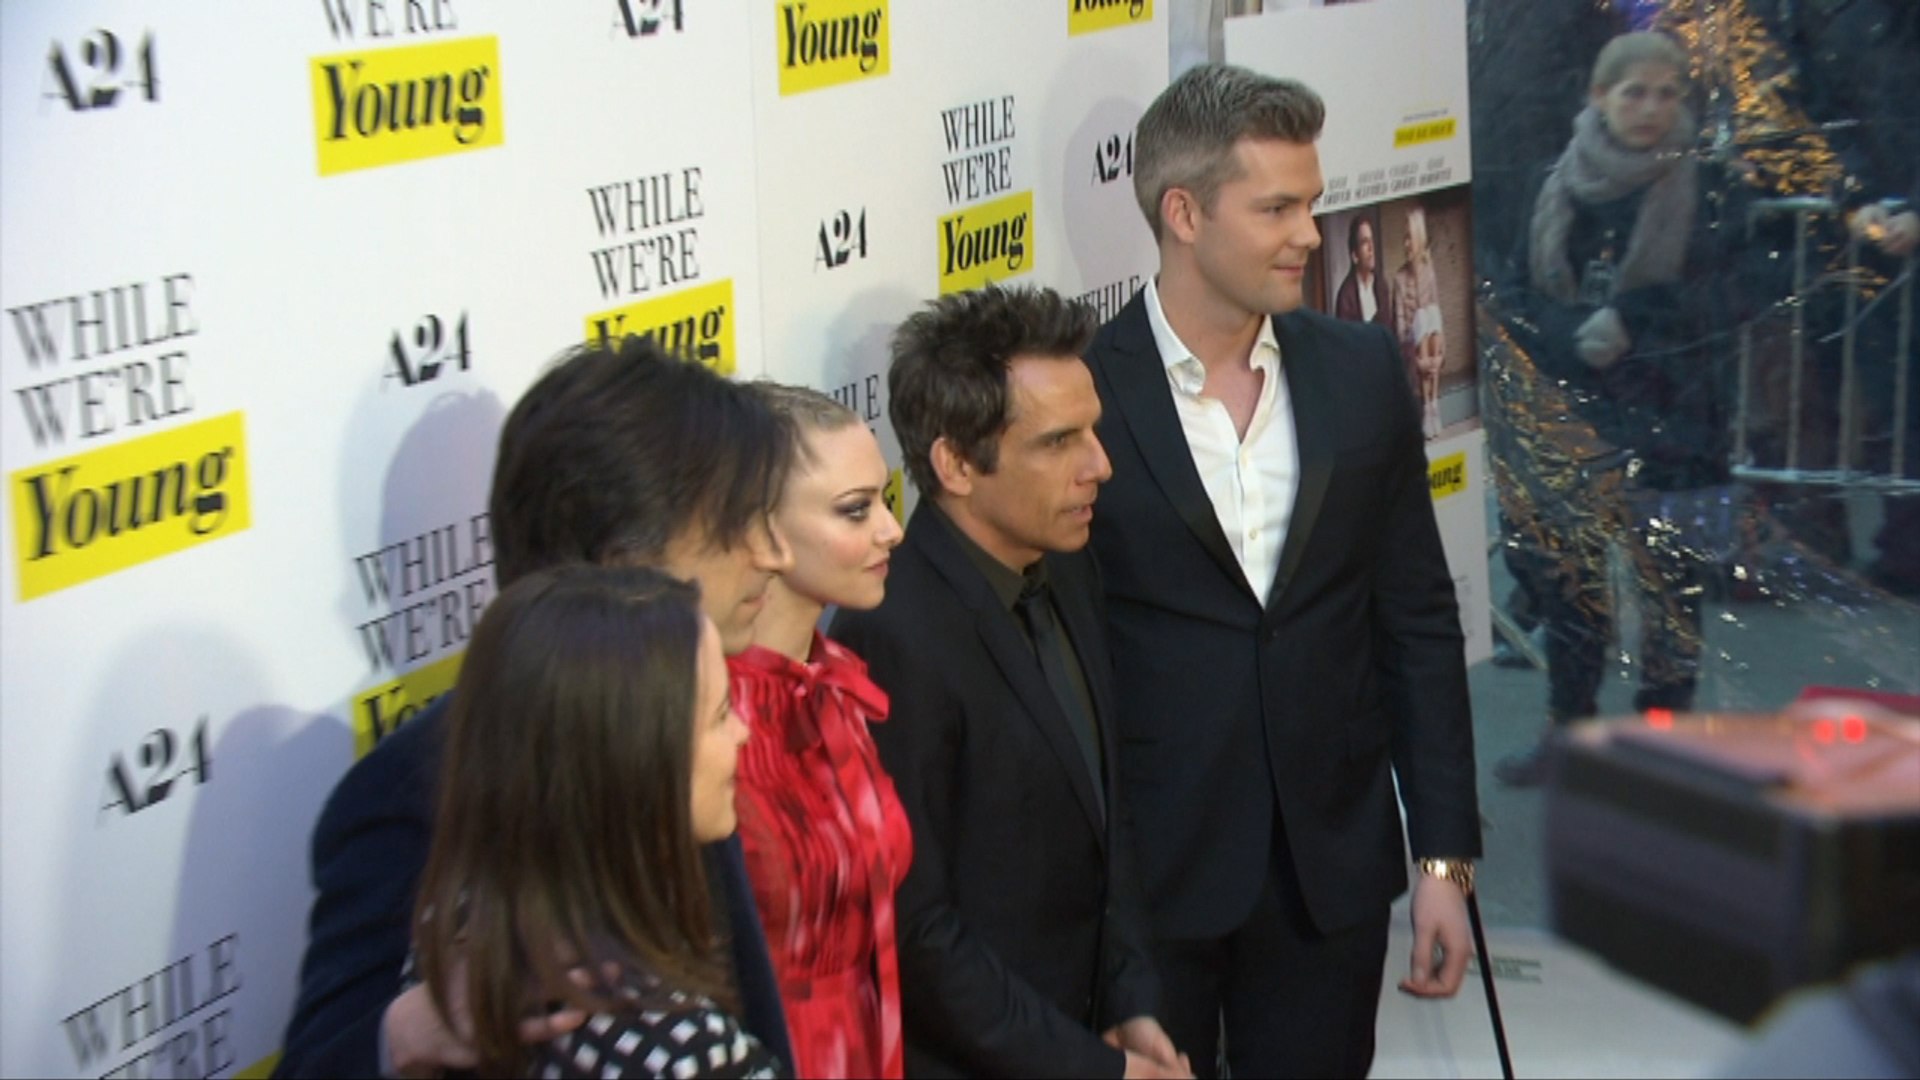 ⁣'While We're Young' Premiere and Hot Cast On Red Carpet